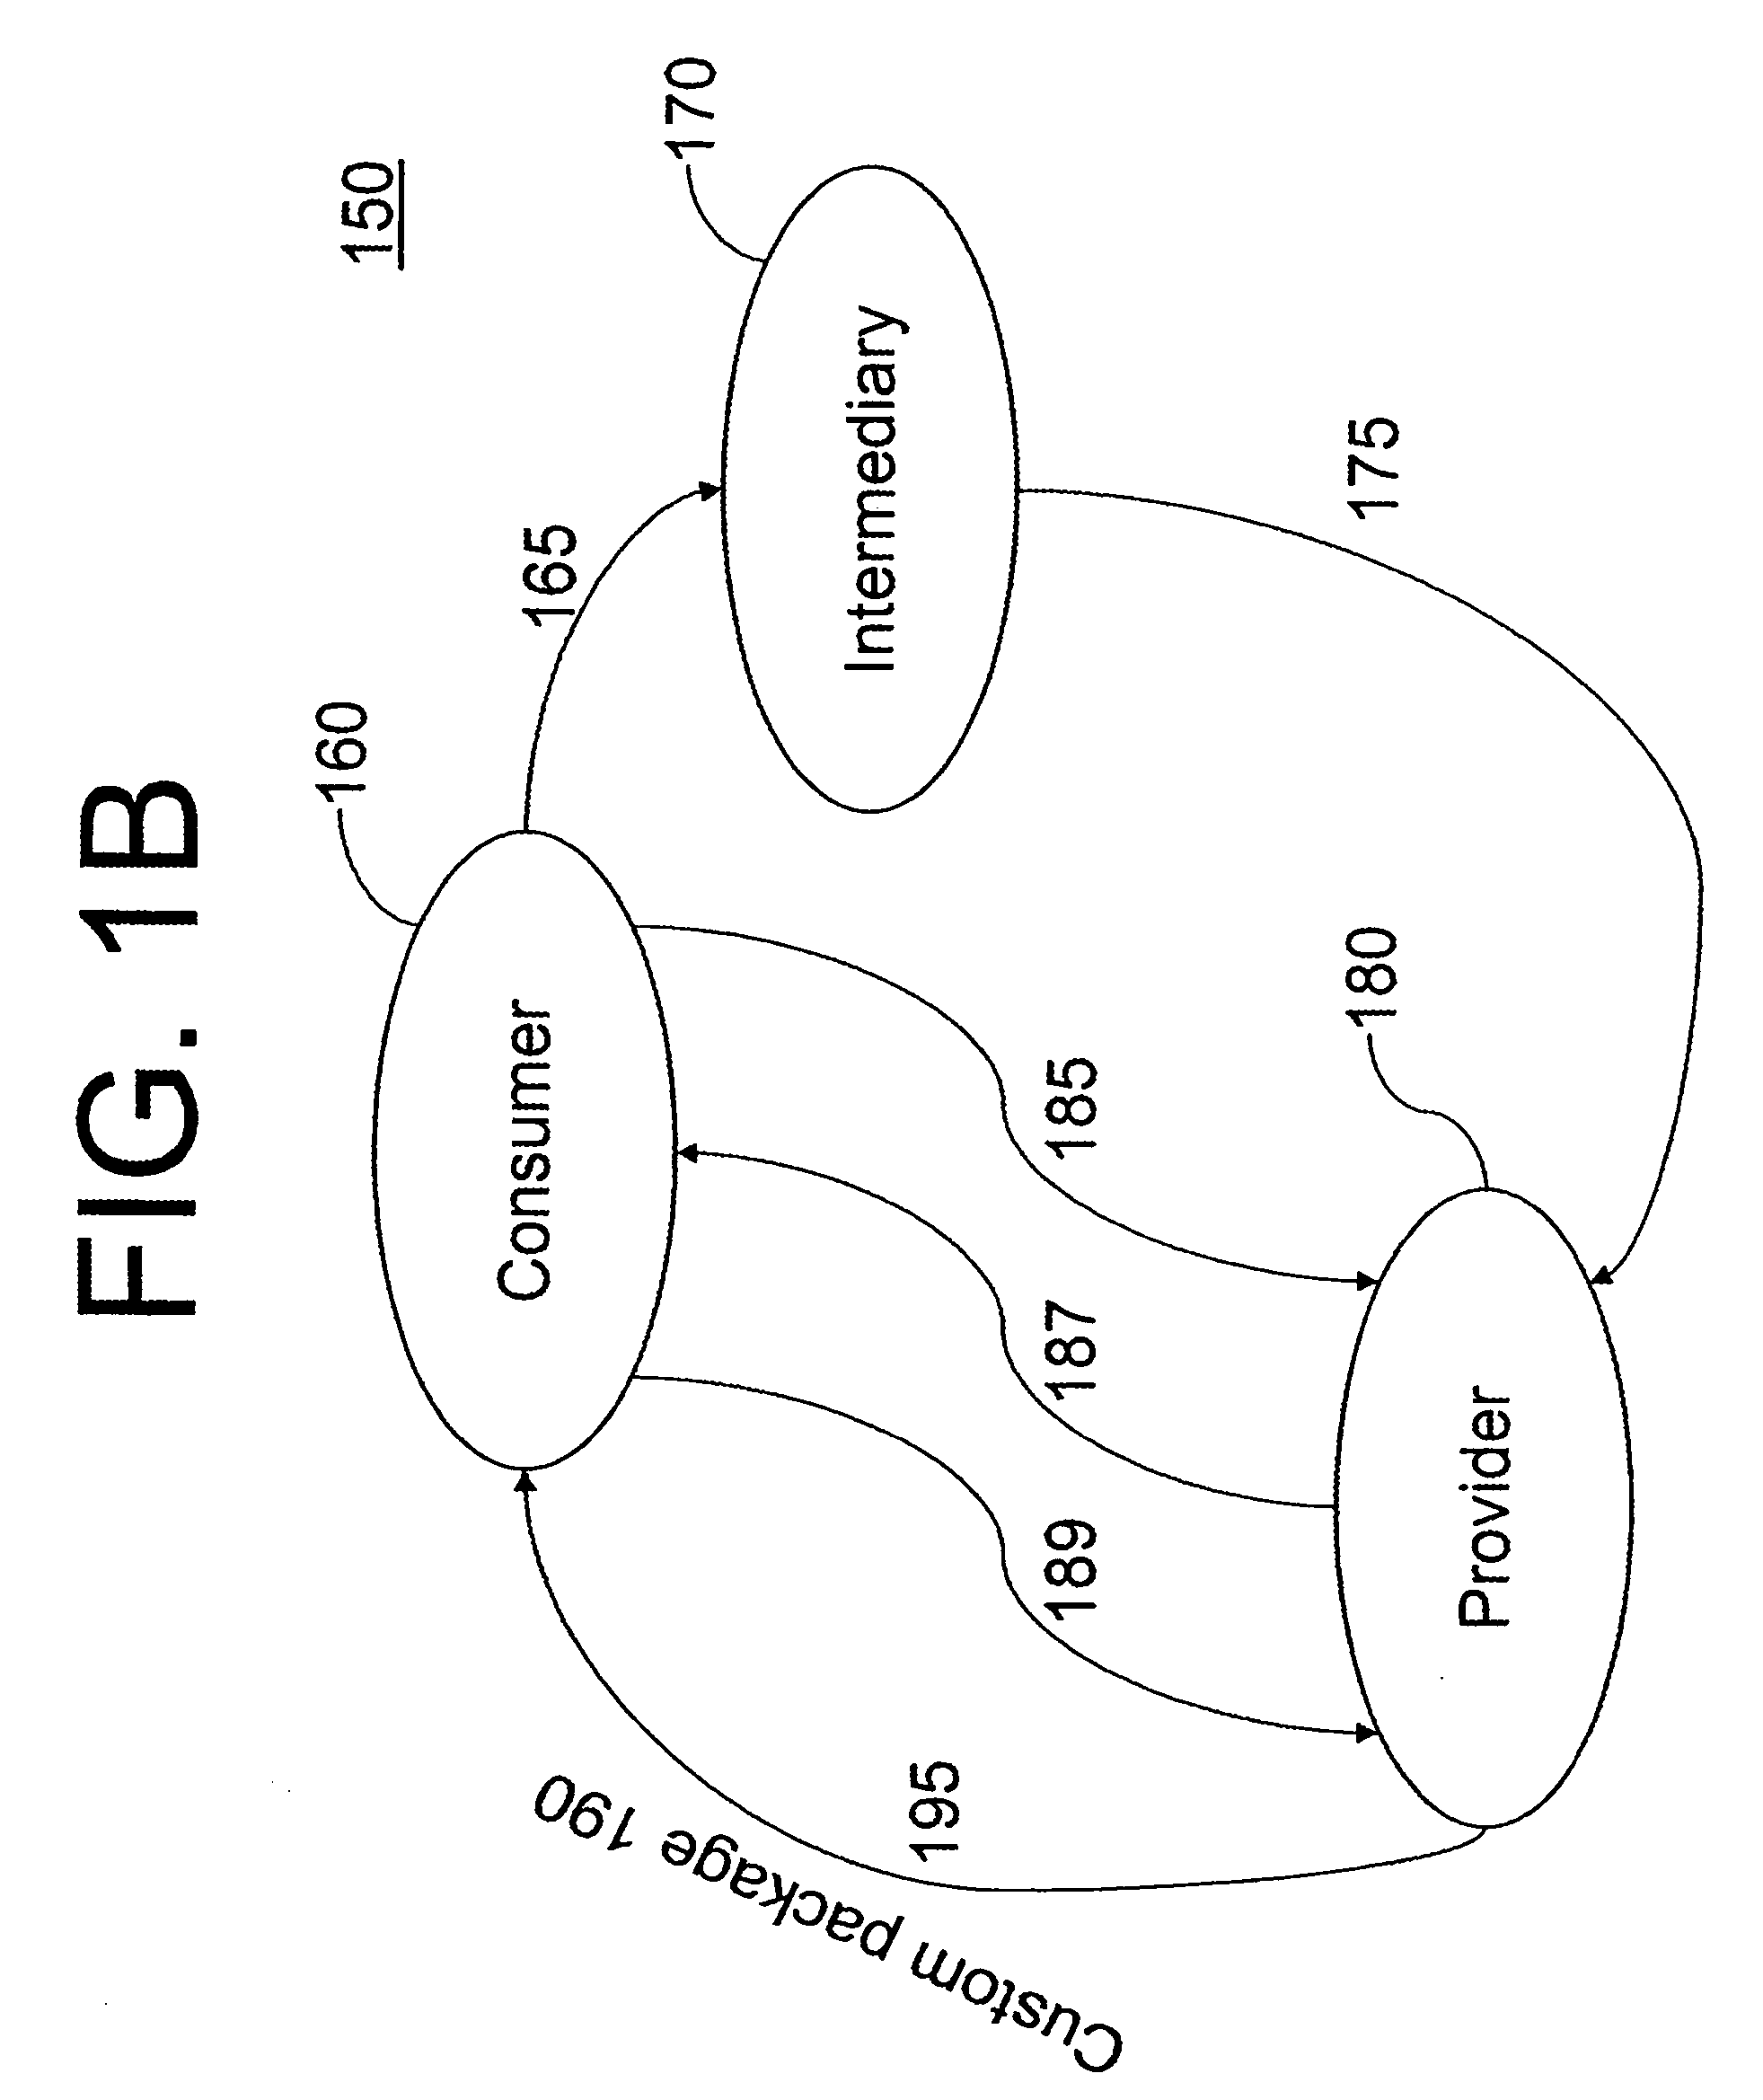 Method and system for facilitating individualized packaging and follow-up capability on a mass scale